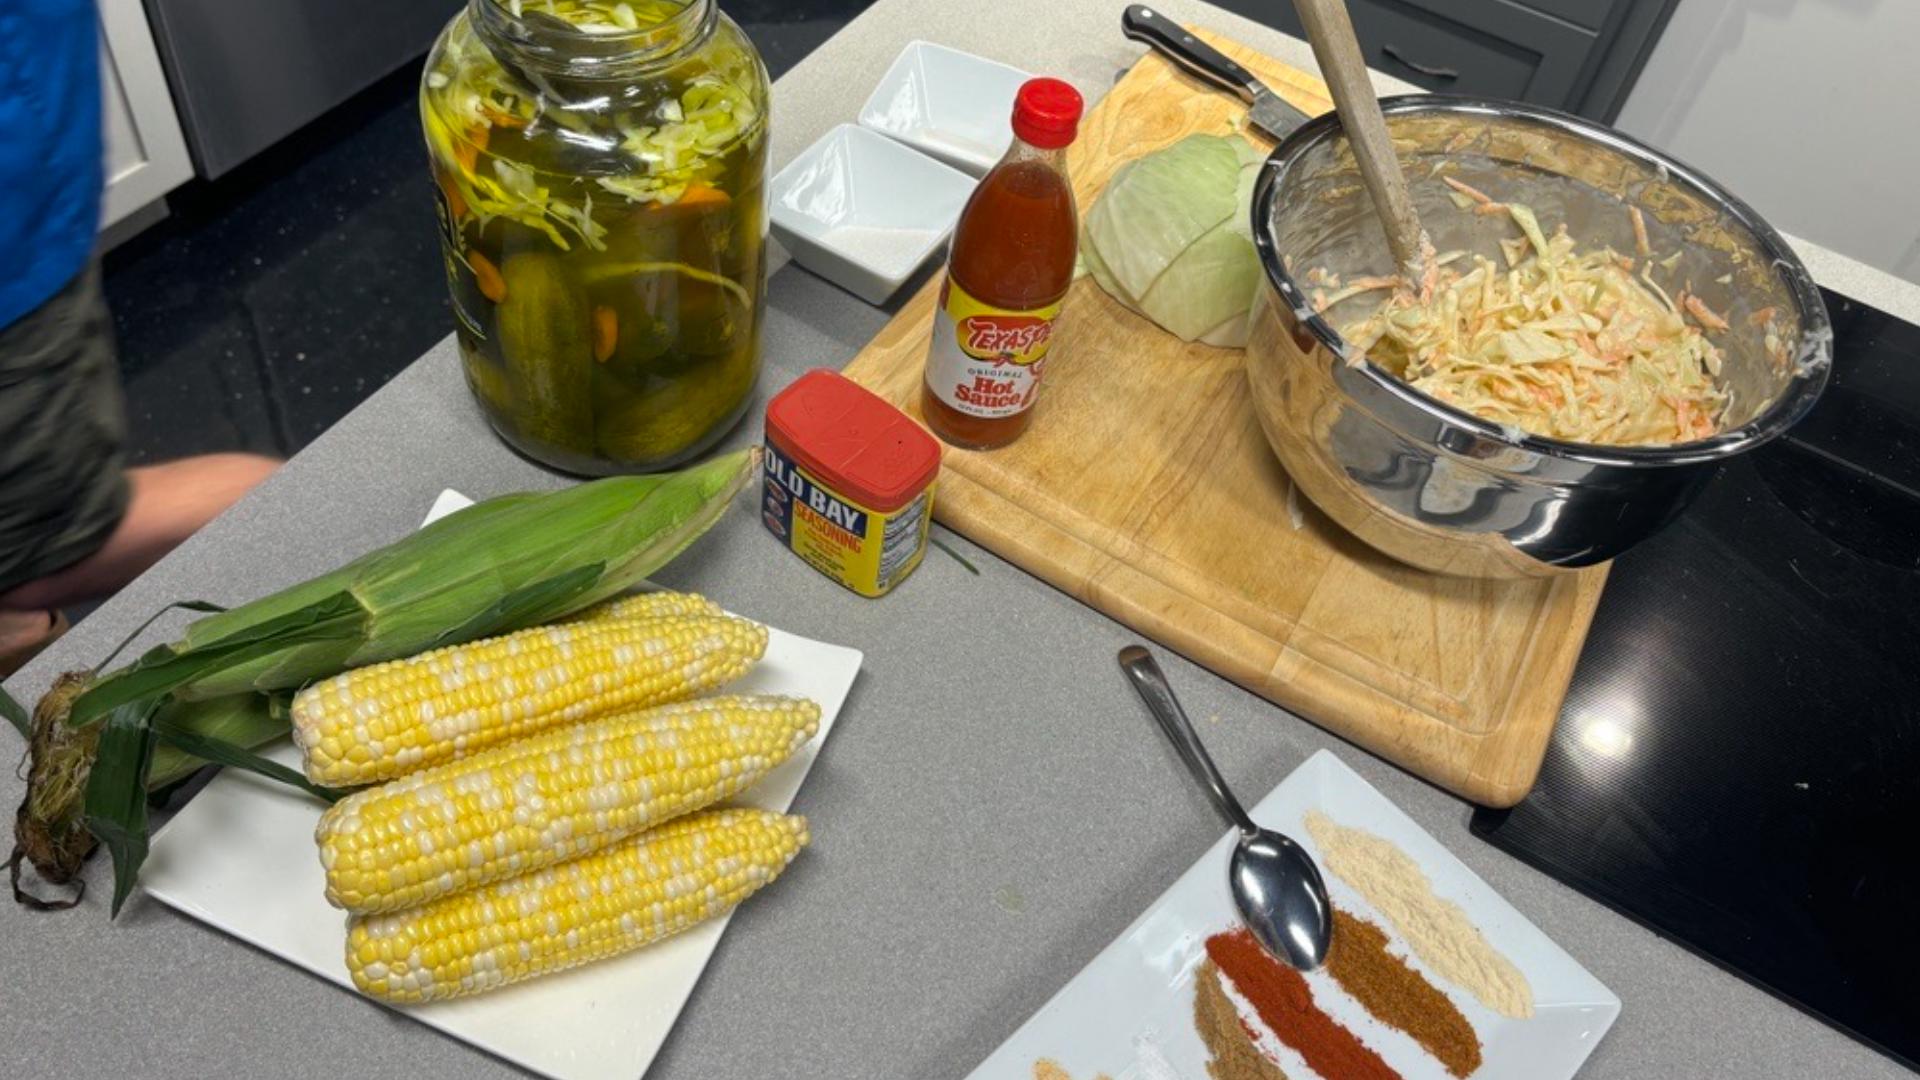 Olivia's recommends serving their version of the popular dish on buttered bread, along with grilled corn on the cob, creamy coleslaw and pickles.